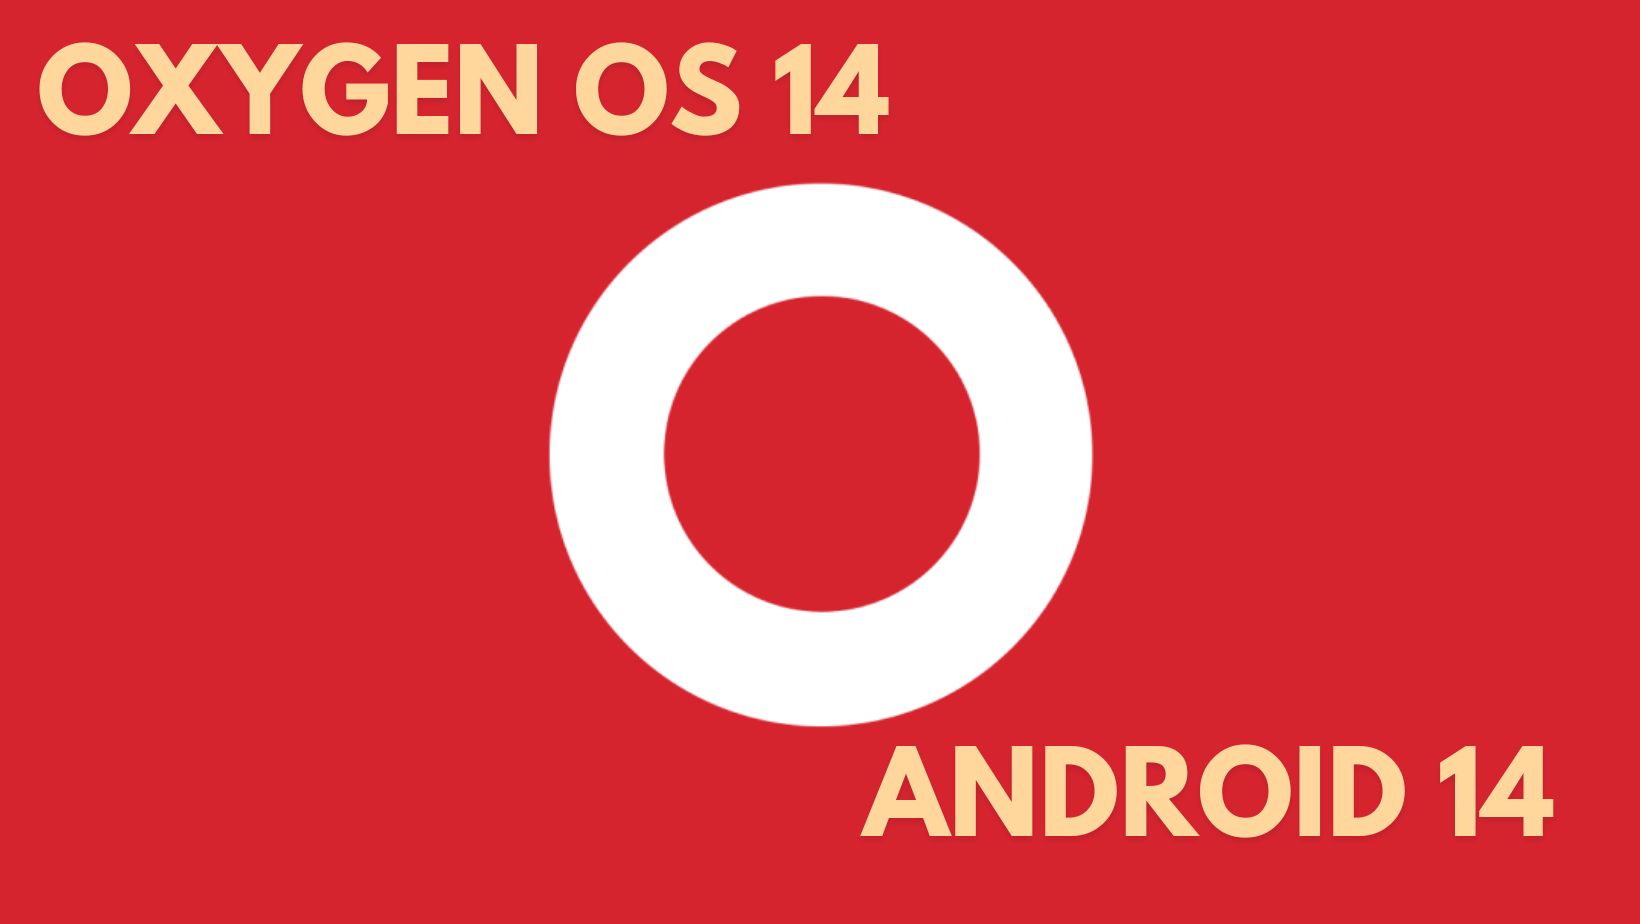 Oxygen OS 14 for OnePlus devices